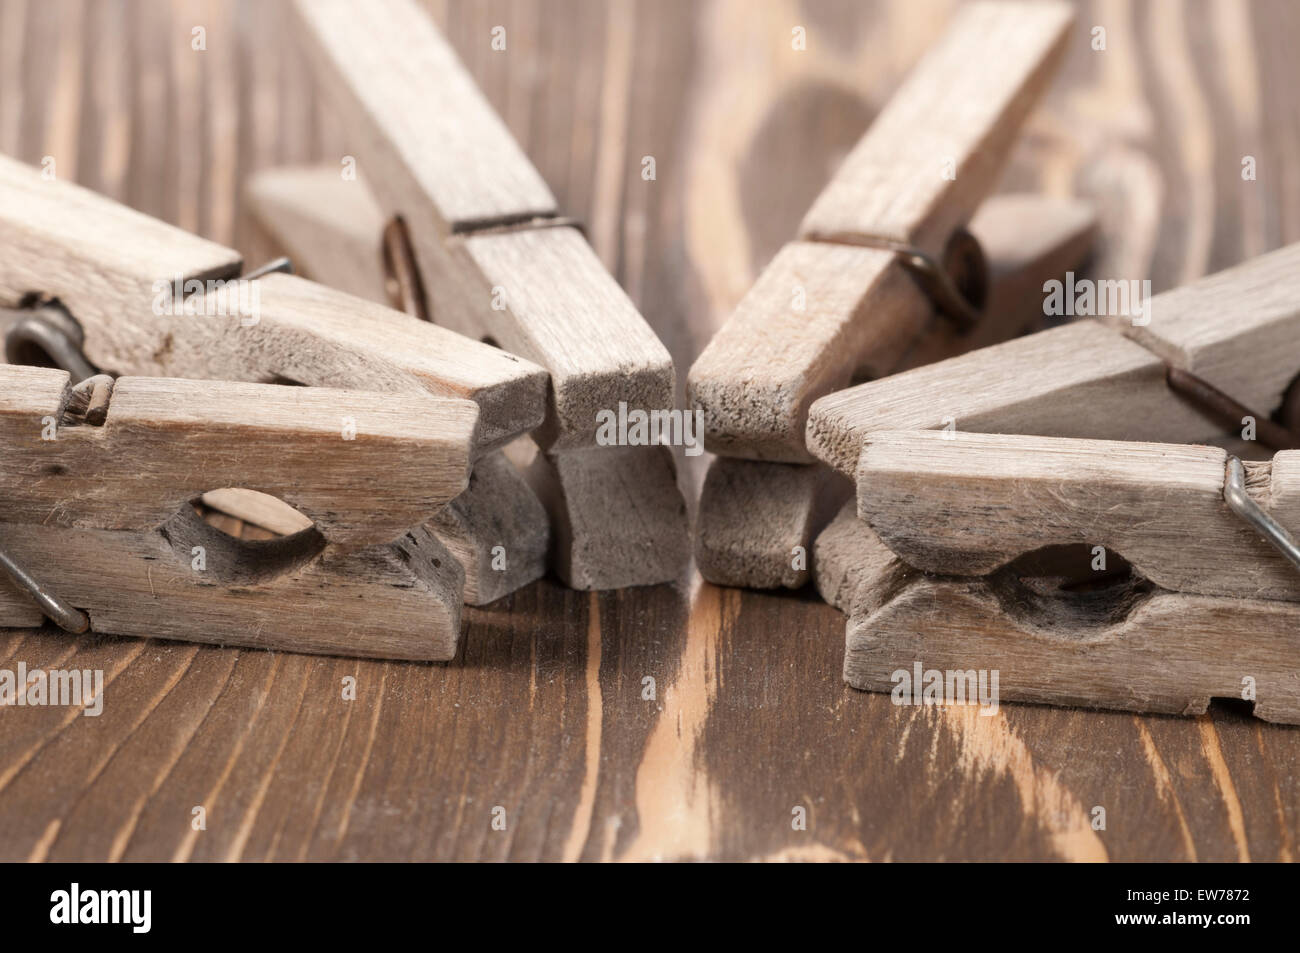 Old wooden clothes pins  on a timber board, close-up Stock Photo